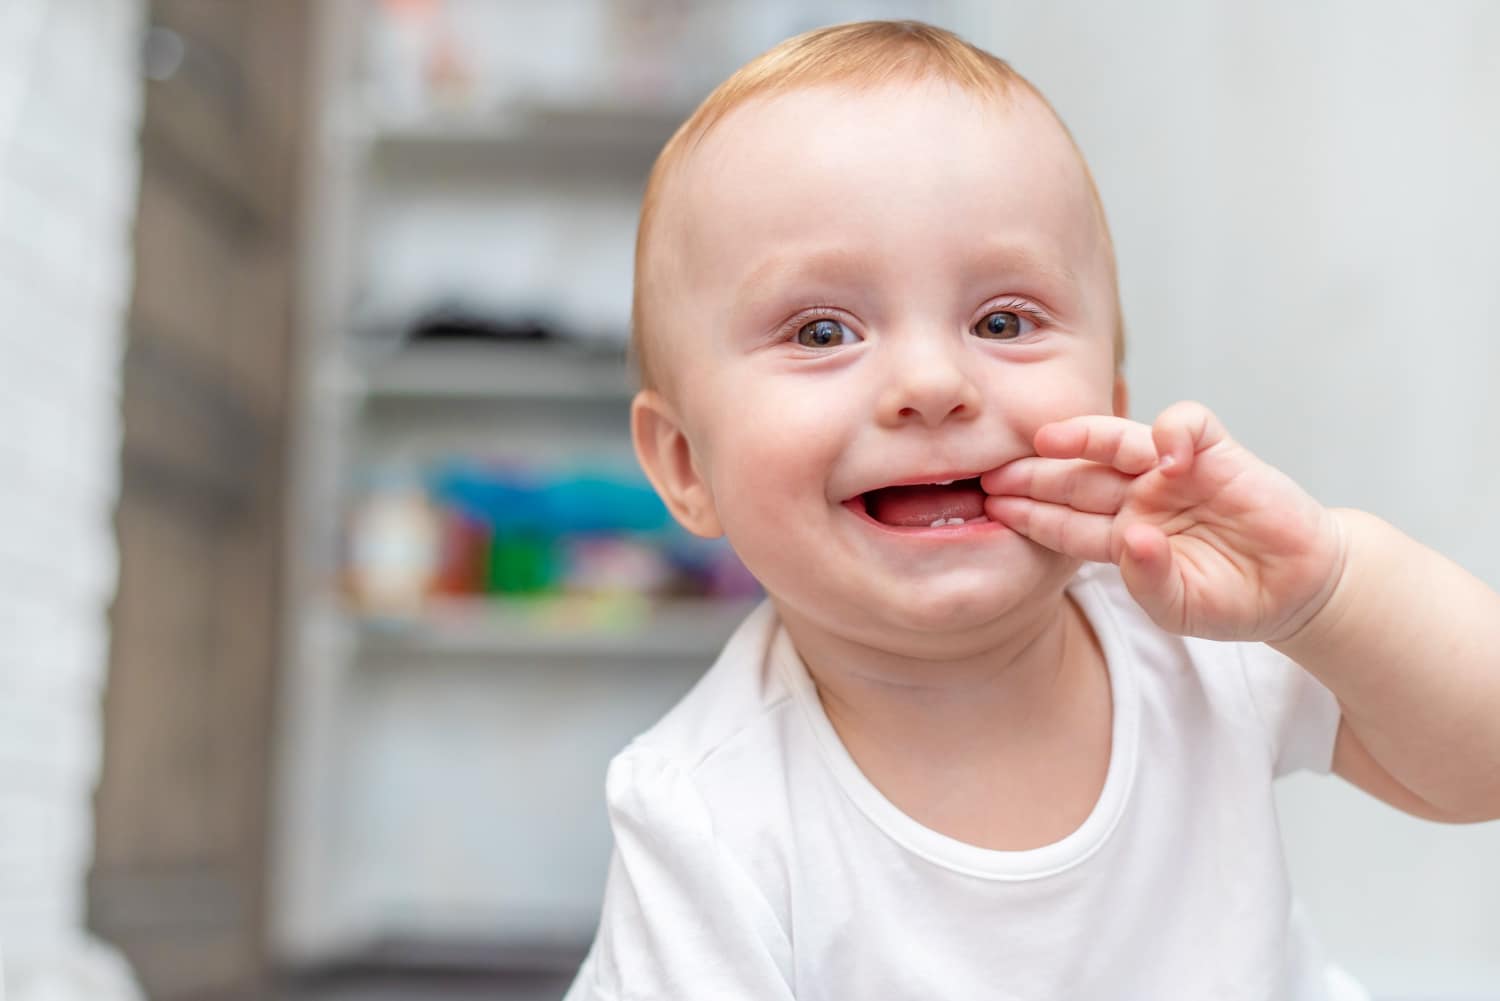 Tips for Helping a Teething Child